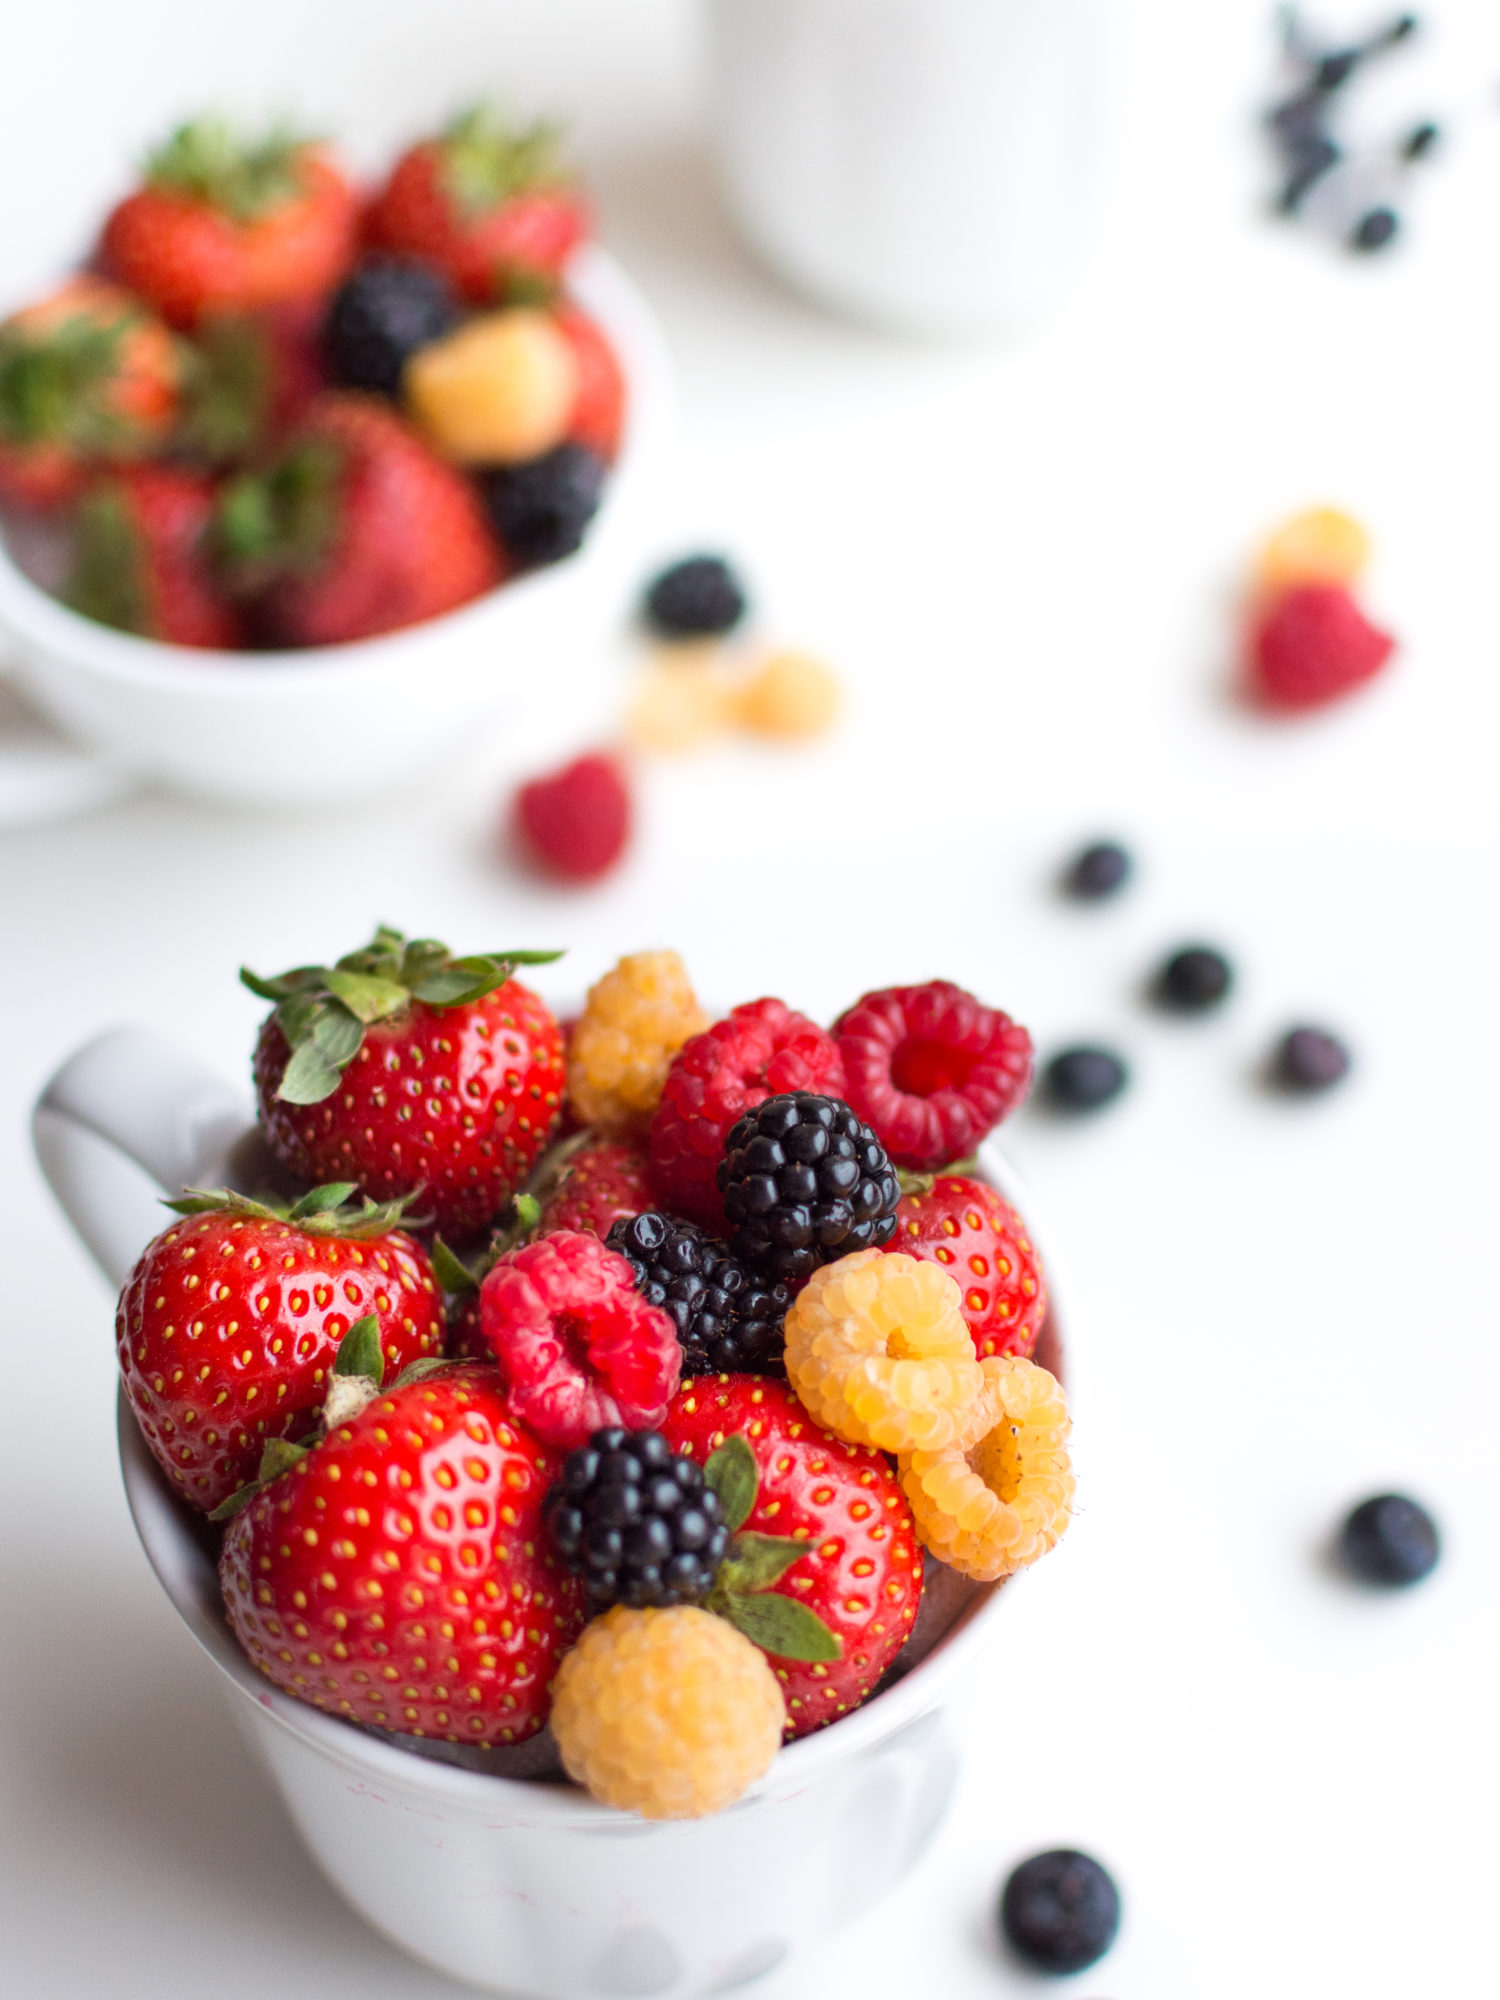 Vibrant shot of colorful healthy fresh berries in a cup on a white background